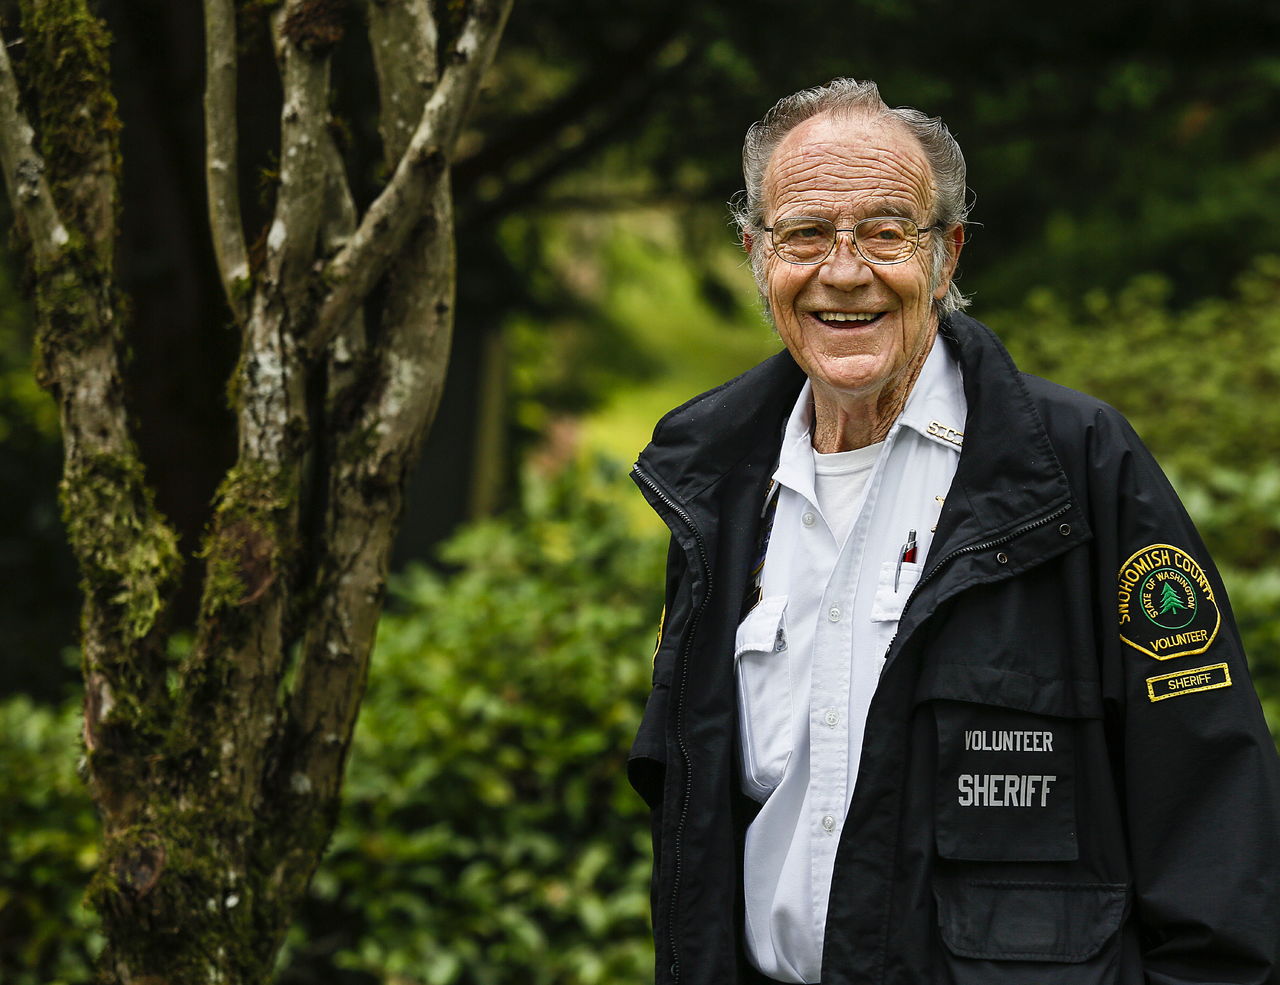 Snohomish County Sheriff’s Office volunteer of the year is Fred Mack. Again. The highly appreciated tracker of people with dementia, Alzheimers, or any other cause for wandering off, won the same award about 15 years ago.